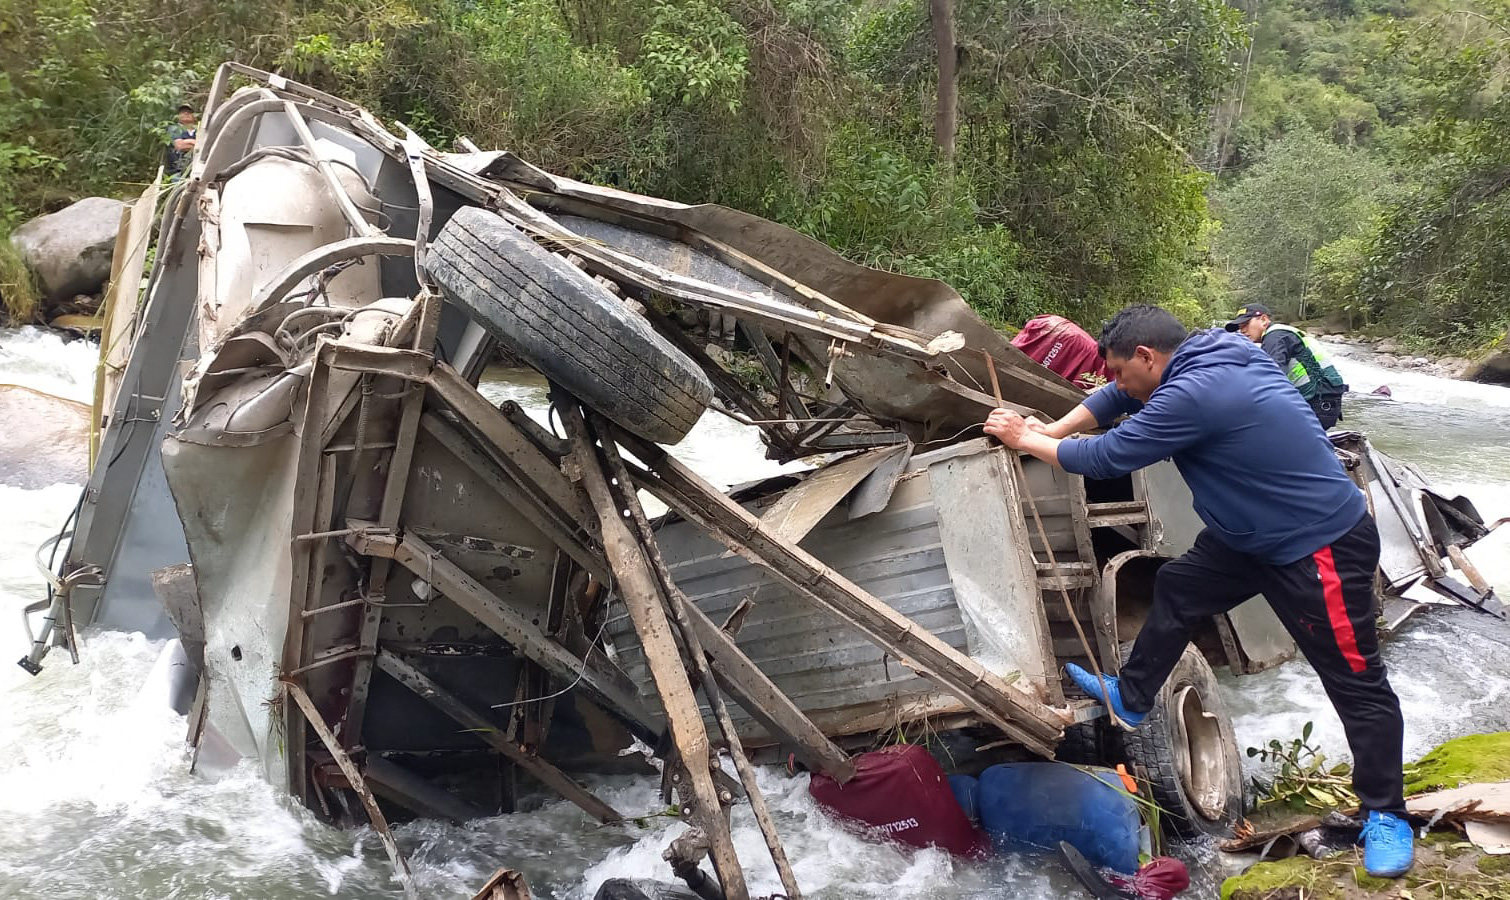 The remains of the bus that fell into a ravine, leaving at least 25 dead. Photo: Policia Nacional del Peru / AFP  